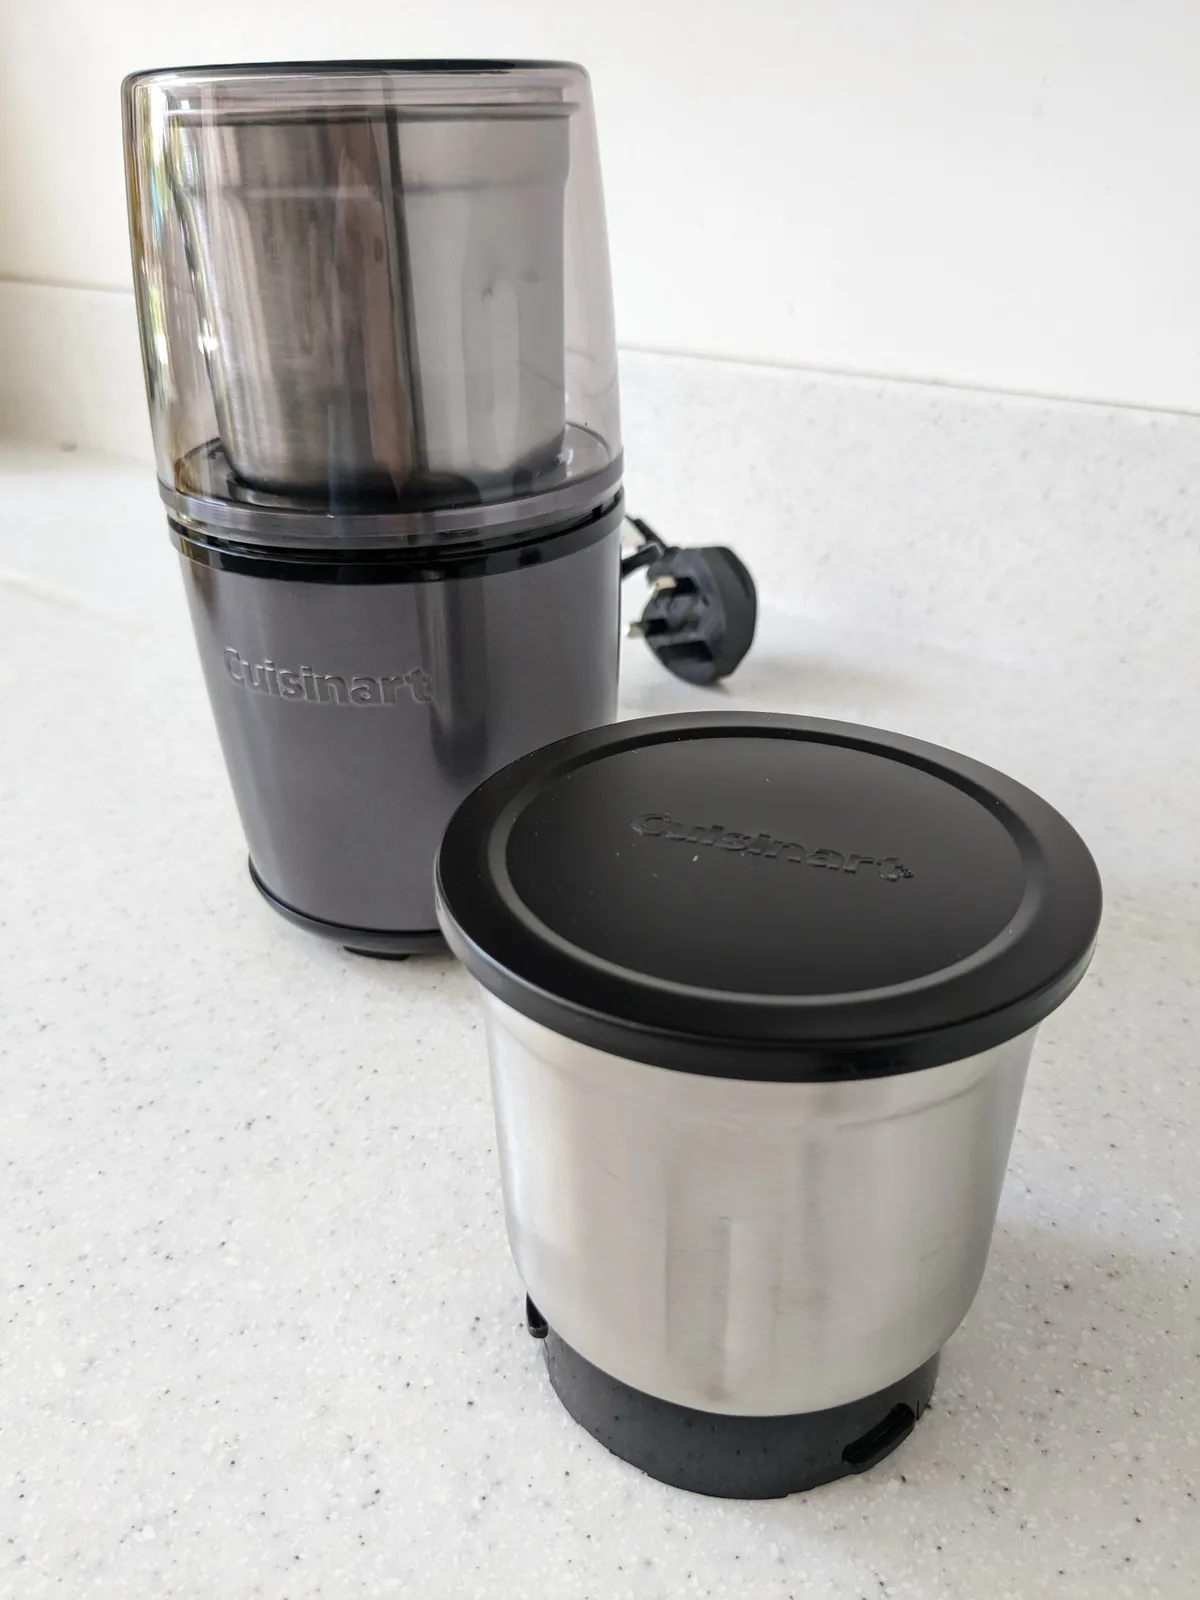 Cuisinart Spice and Nut Grinder SG21U - Let's Review! 